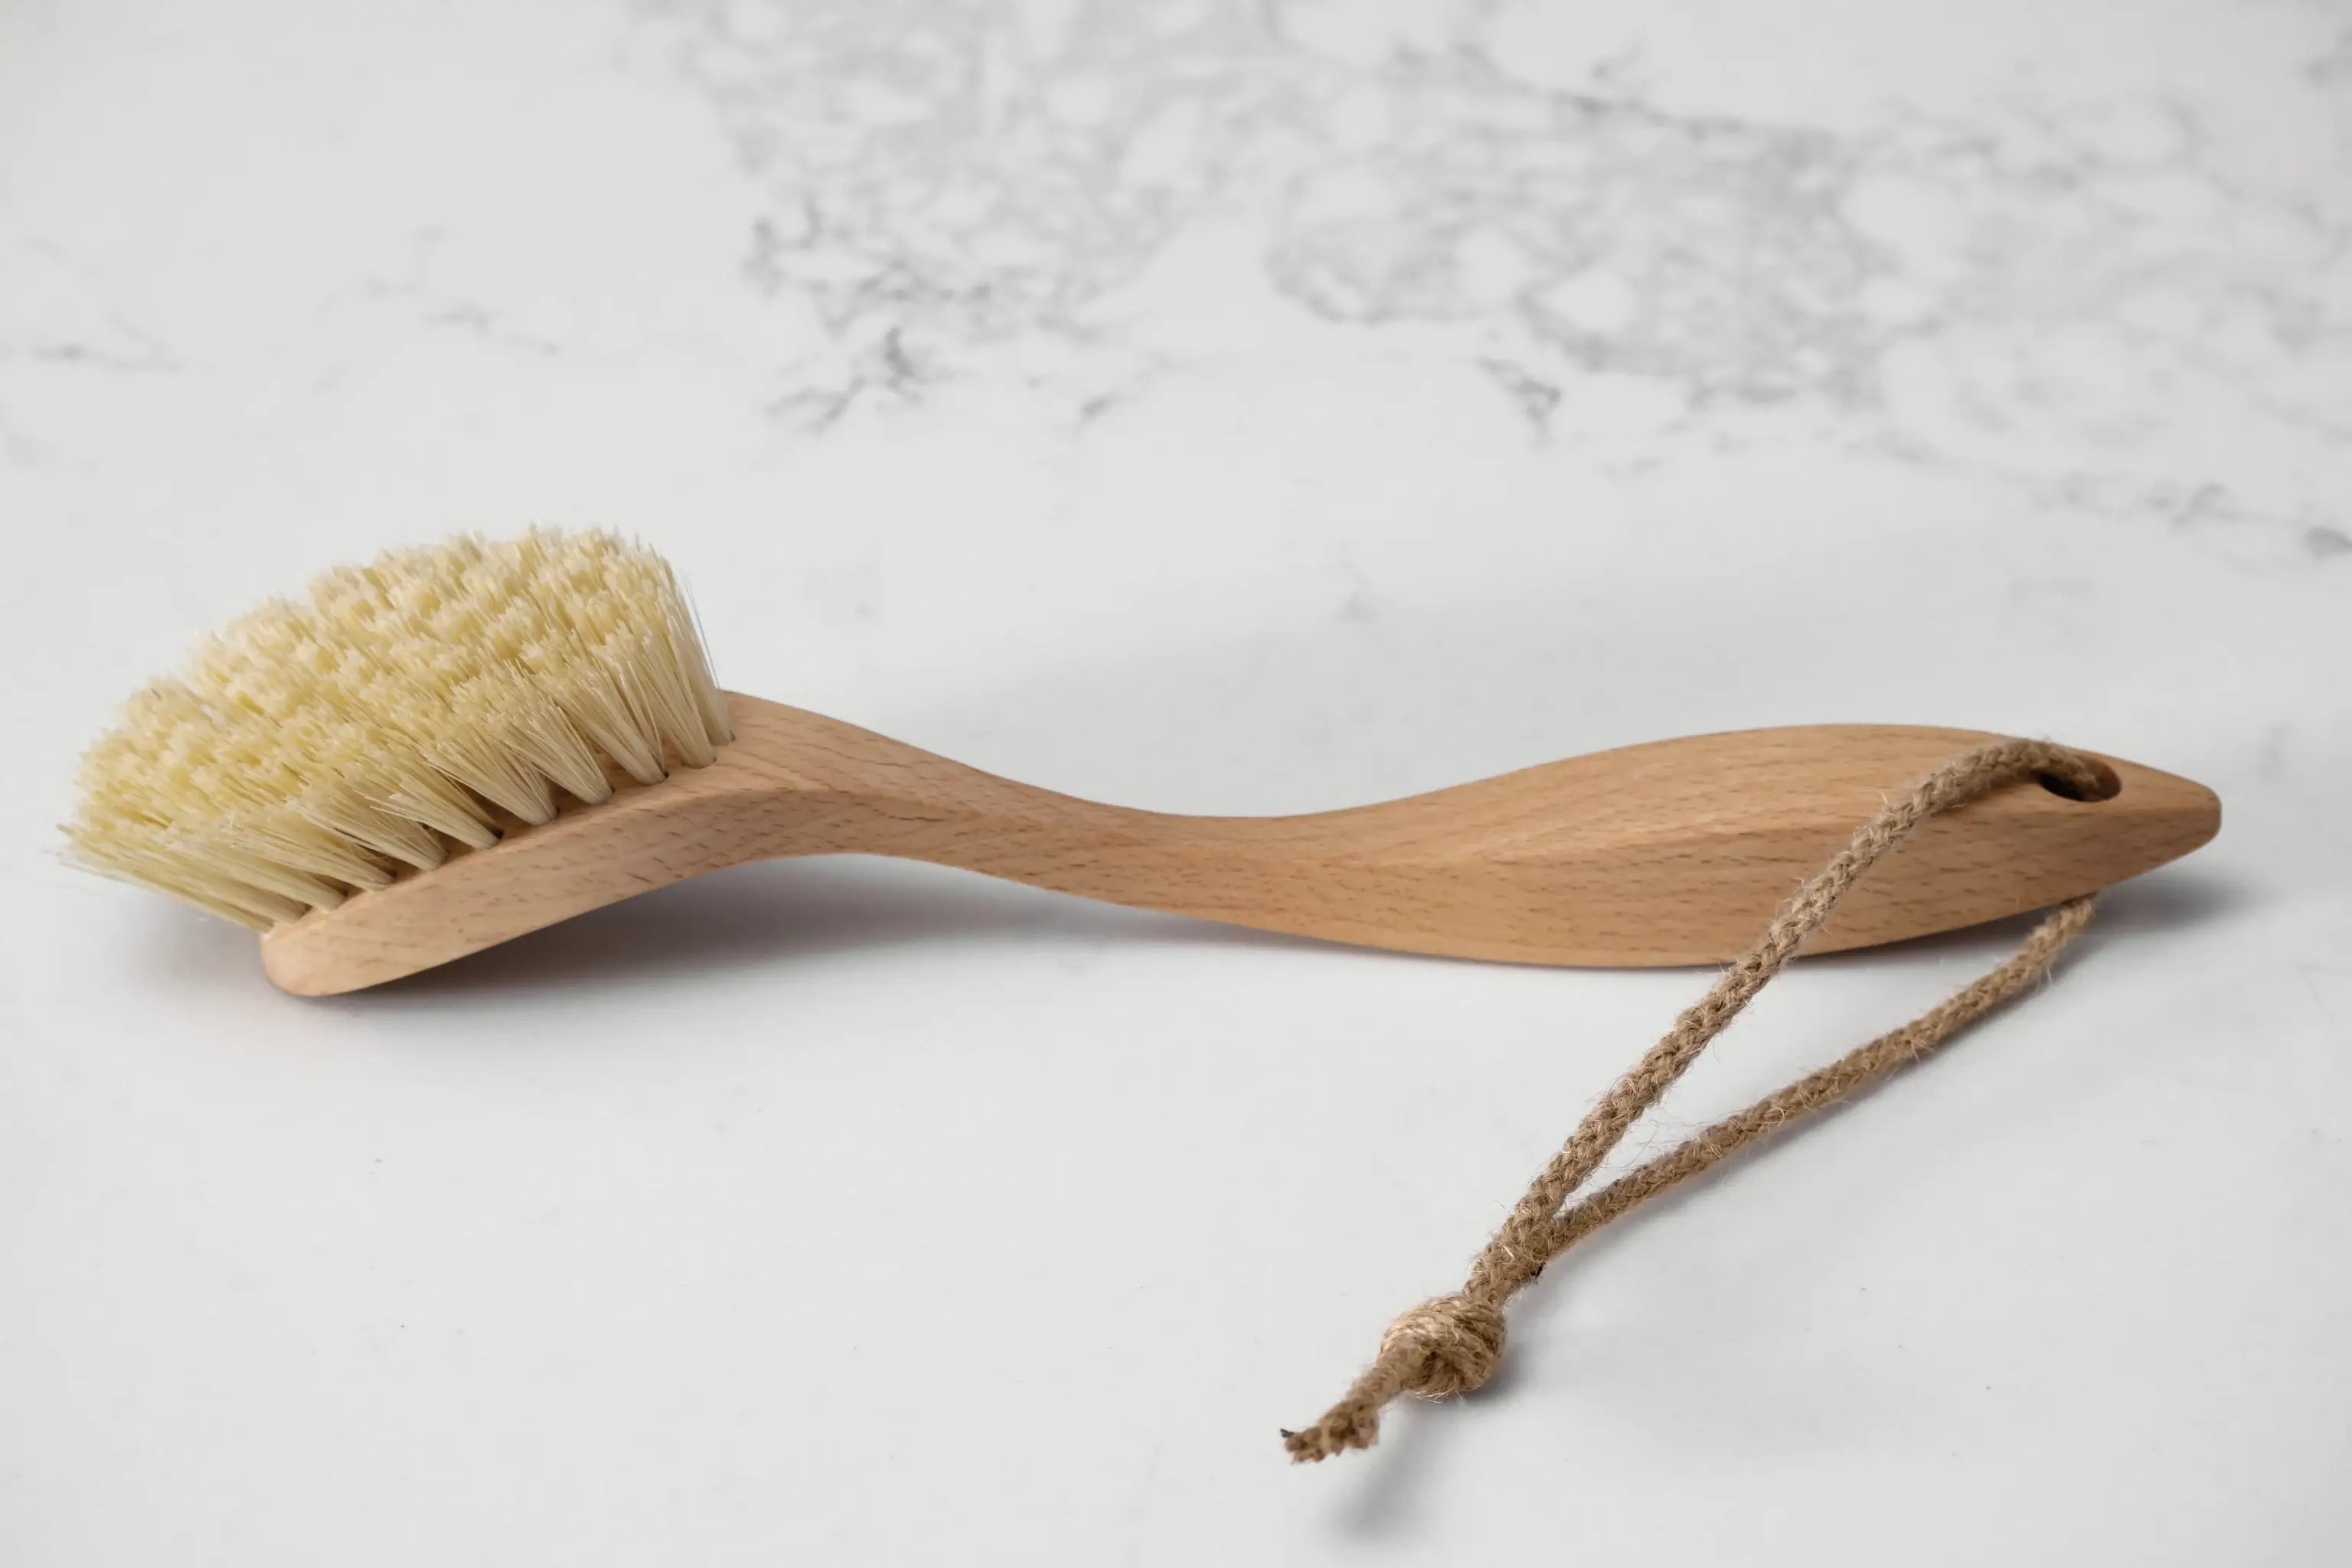 A long handled wooden dish brush with thick light coloured fibres and a hanging loop sit on a marbled surface. Made by UK makers Hillbrush